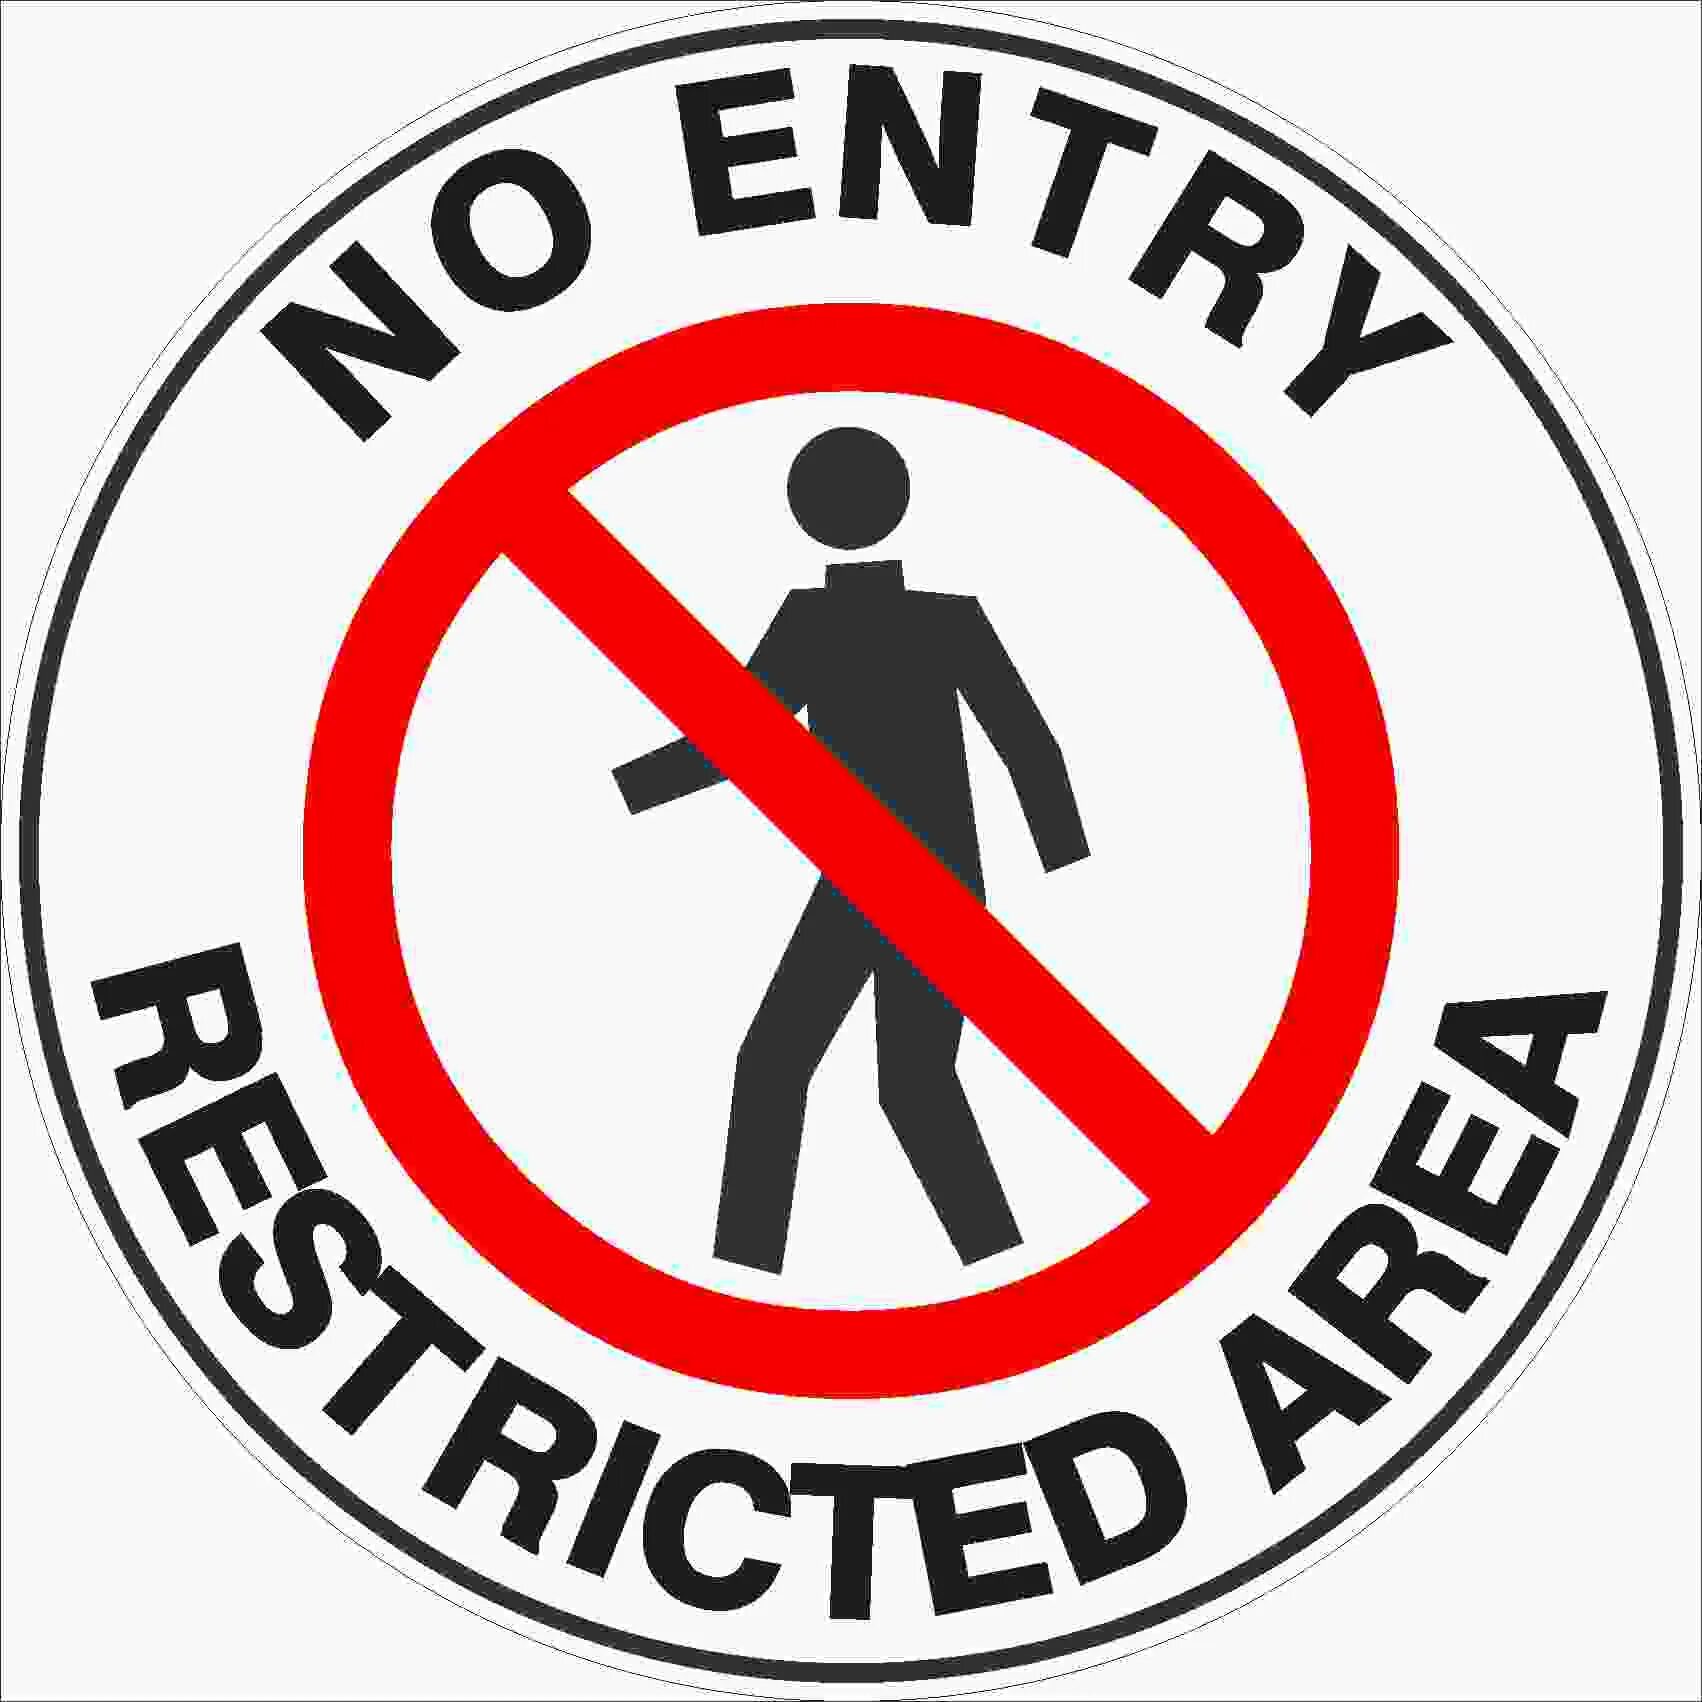 No entry. Entry restrictions. No entry sign. No entry allowed.